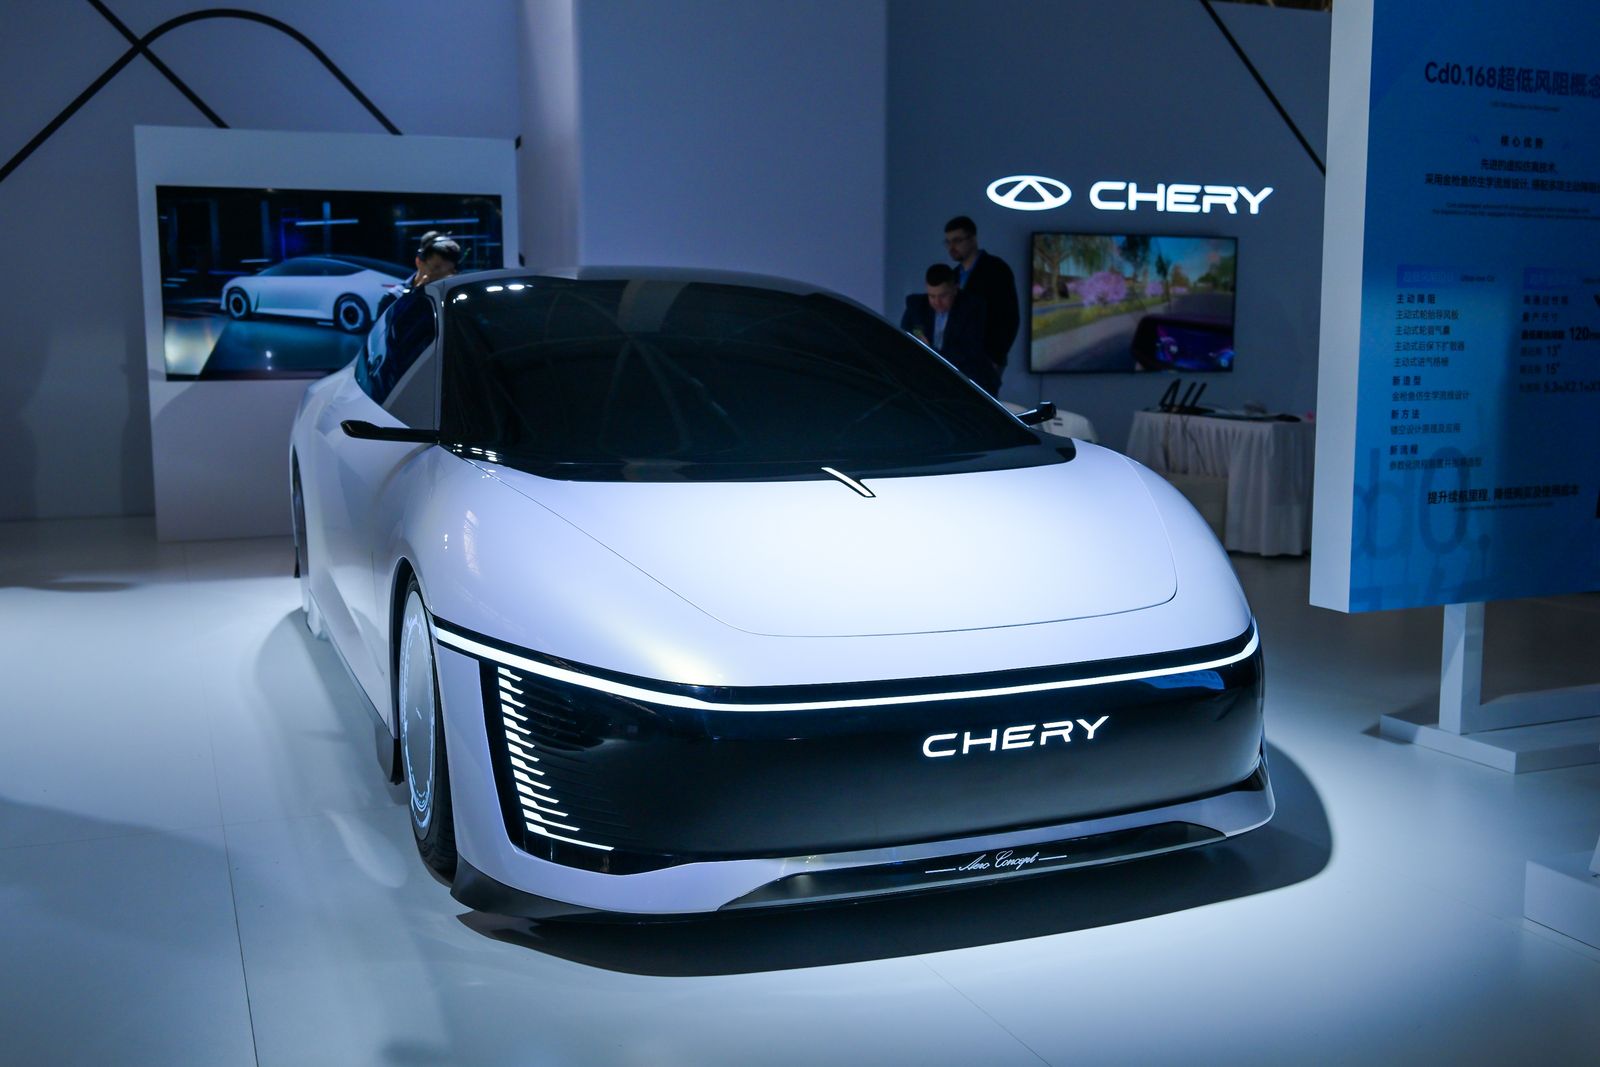 Chery Boasts of 26,000 Patents as it Smashes Sales Goals and Unveils $21b Investment